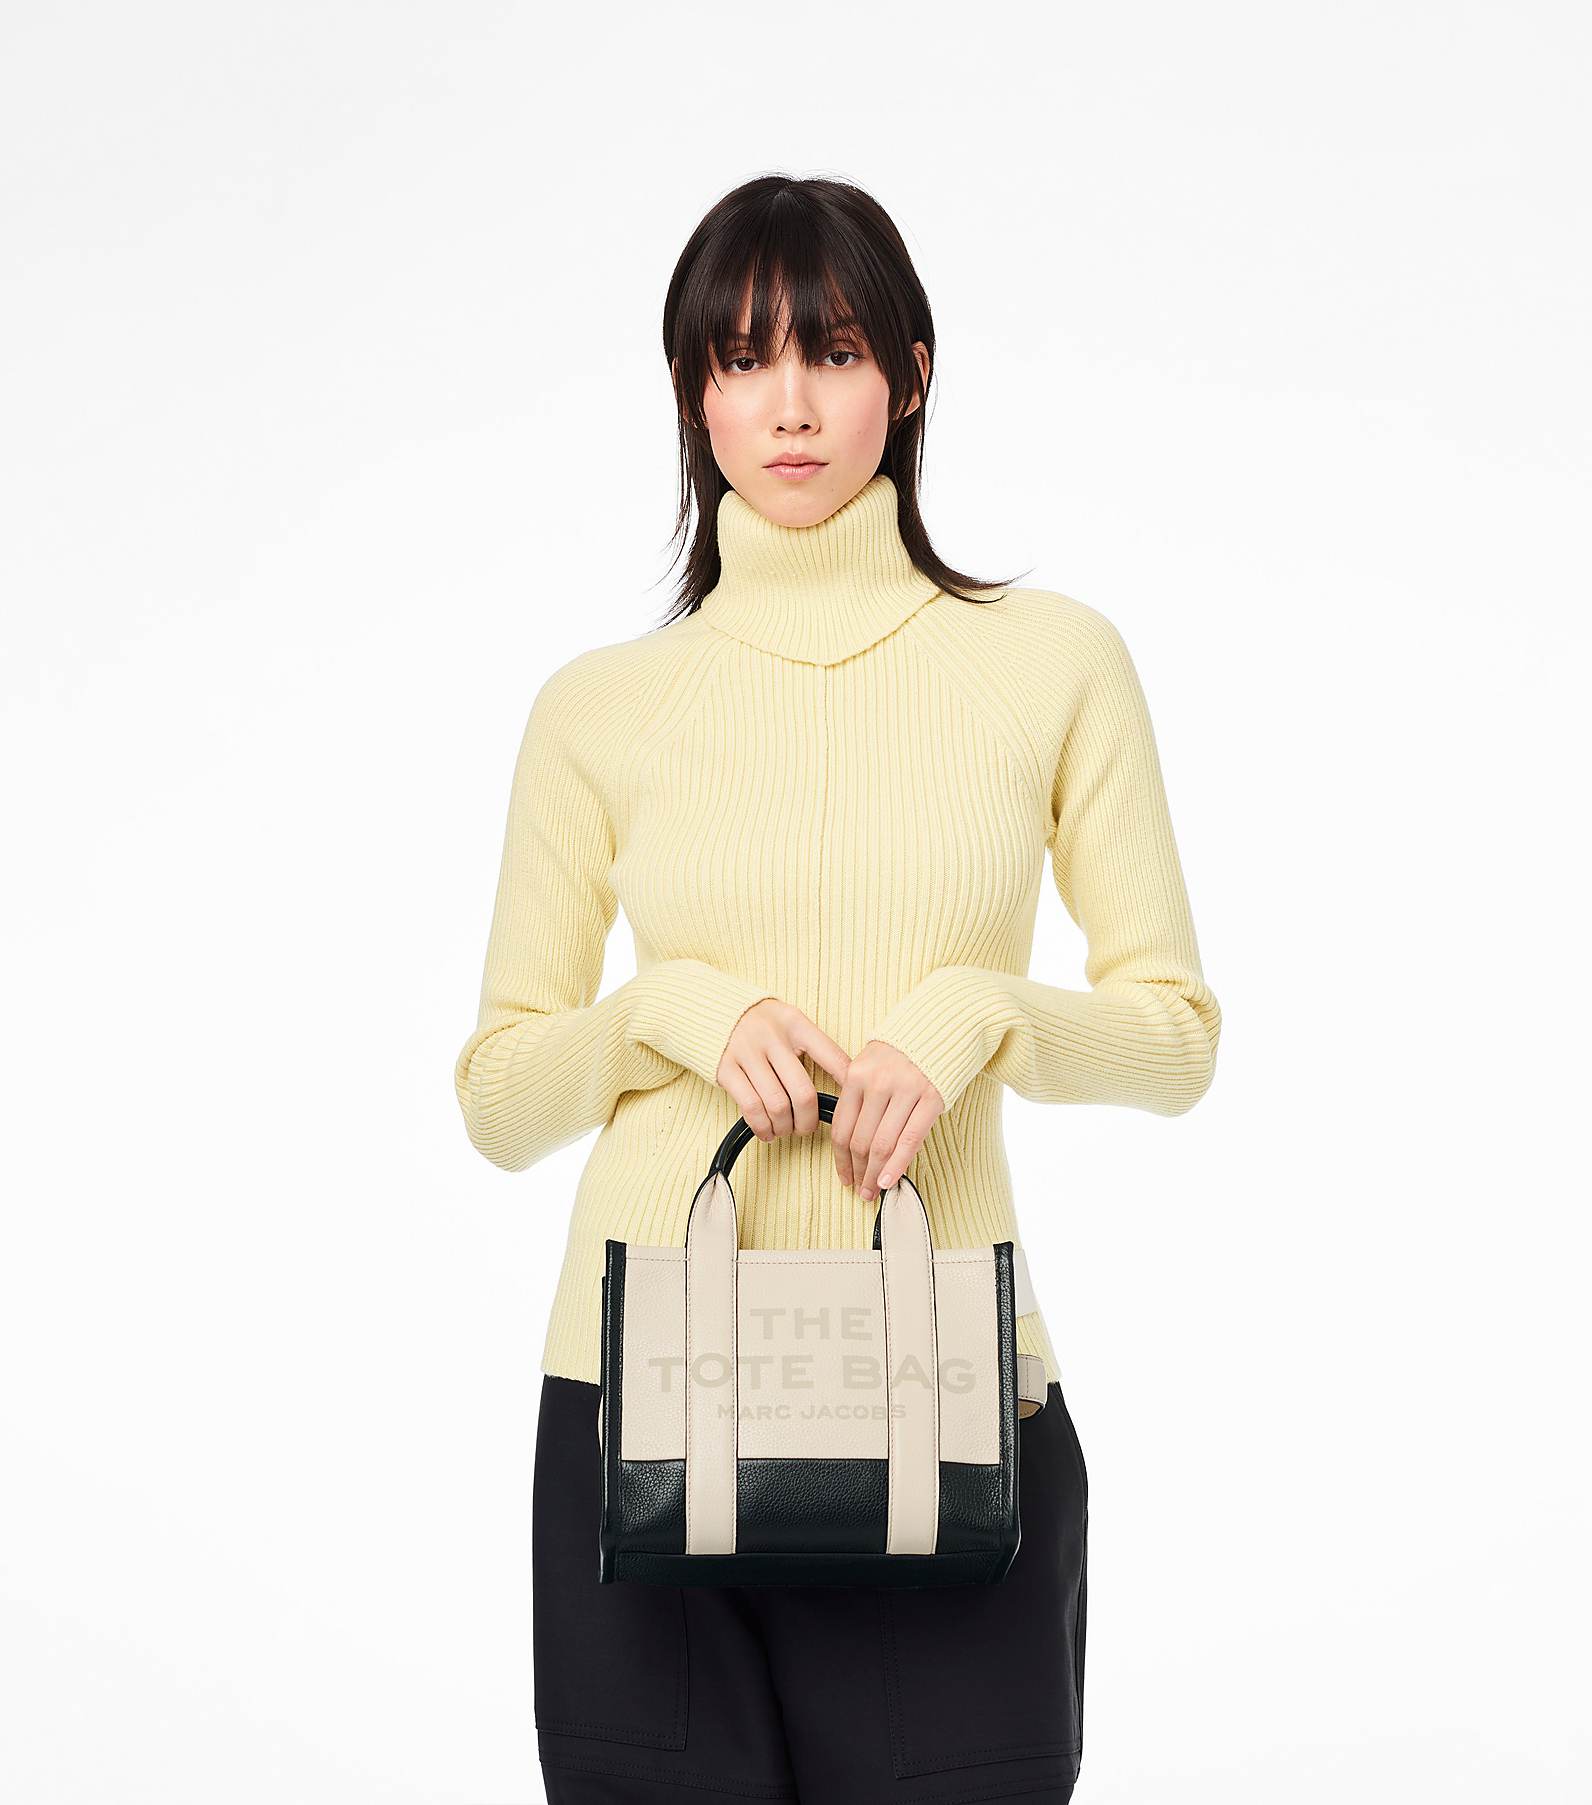 The Colorblock Small Tote Bag | マーク ジェイコブス | 公式サイト